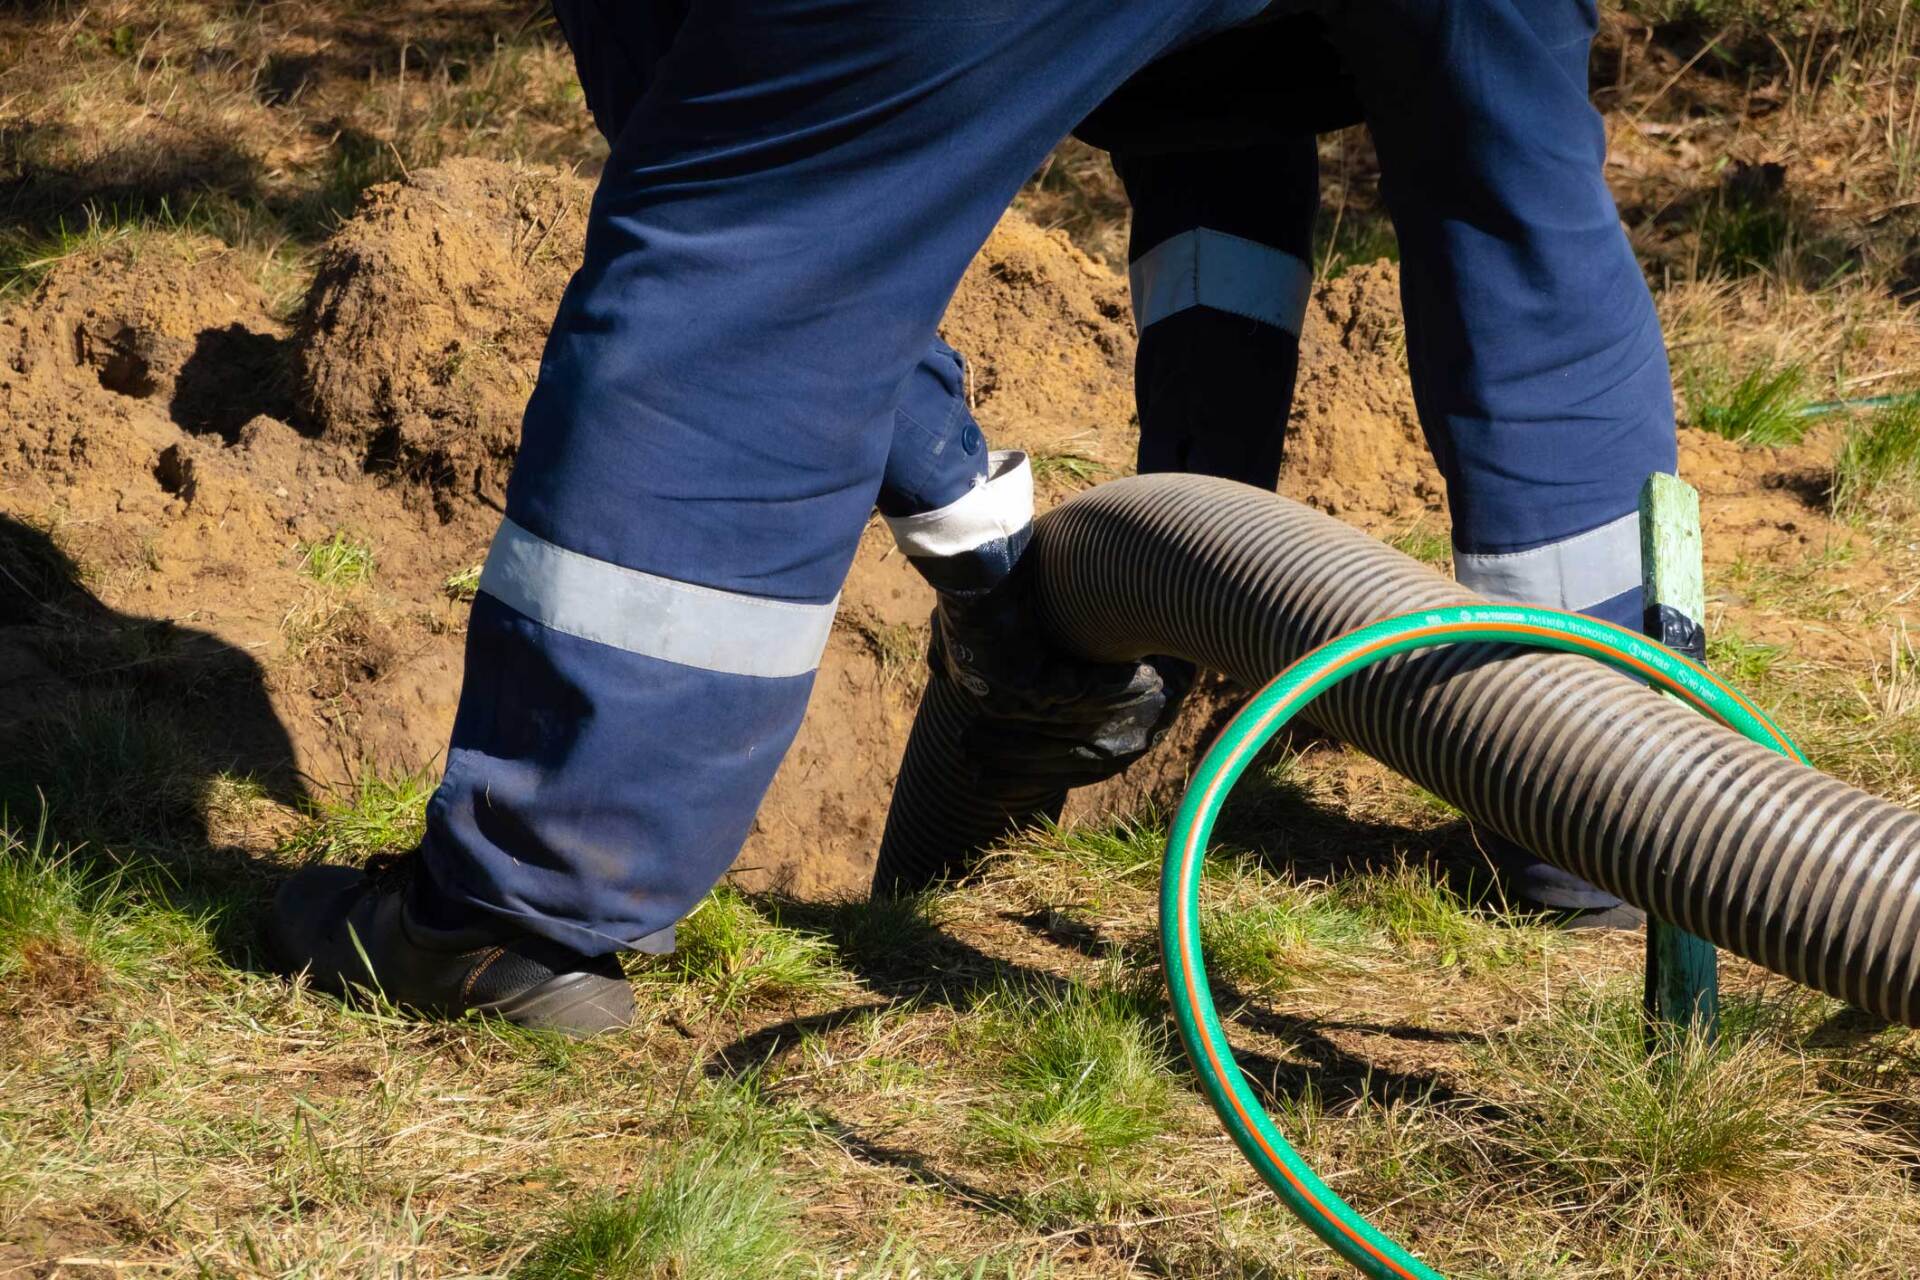 Drain cleaning — Union Gap, WA — Cliff’s Septic Tank Service